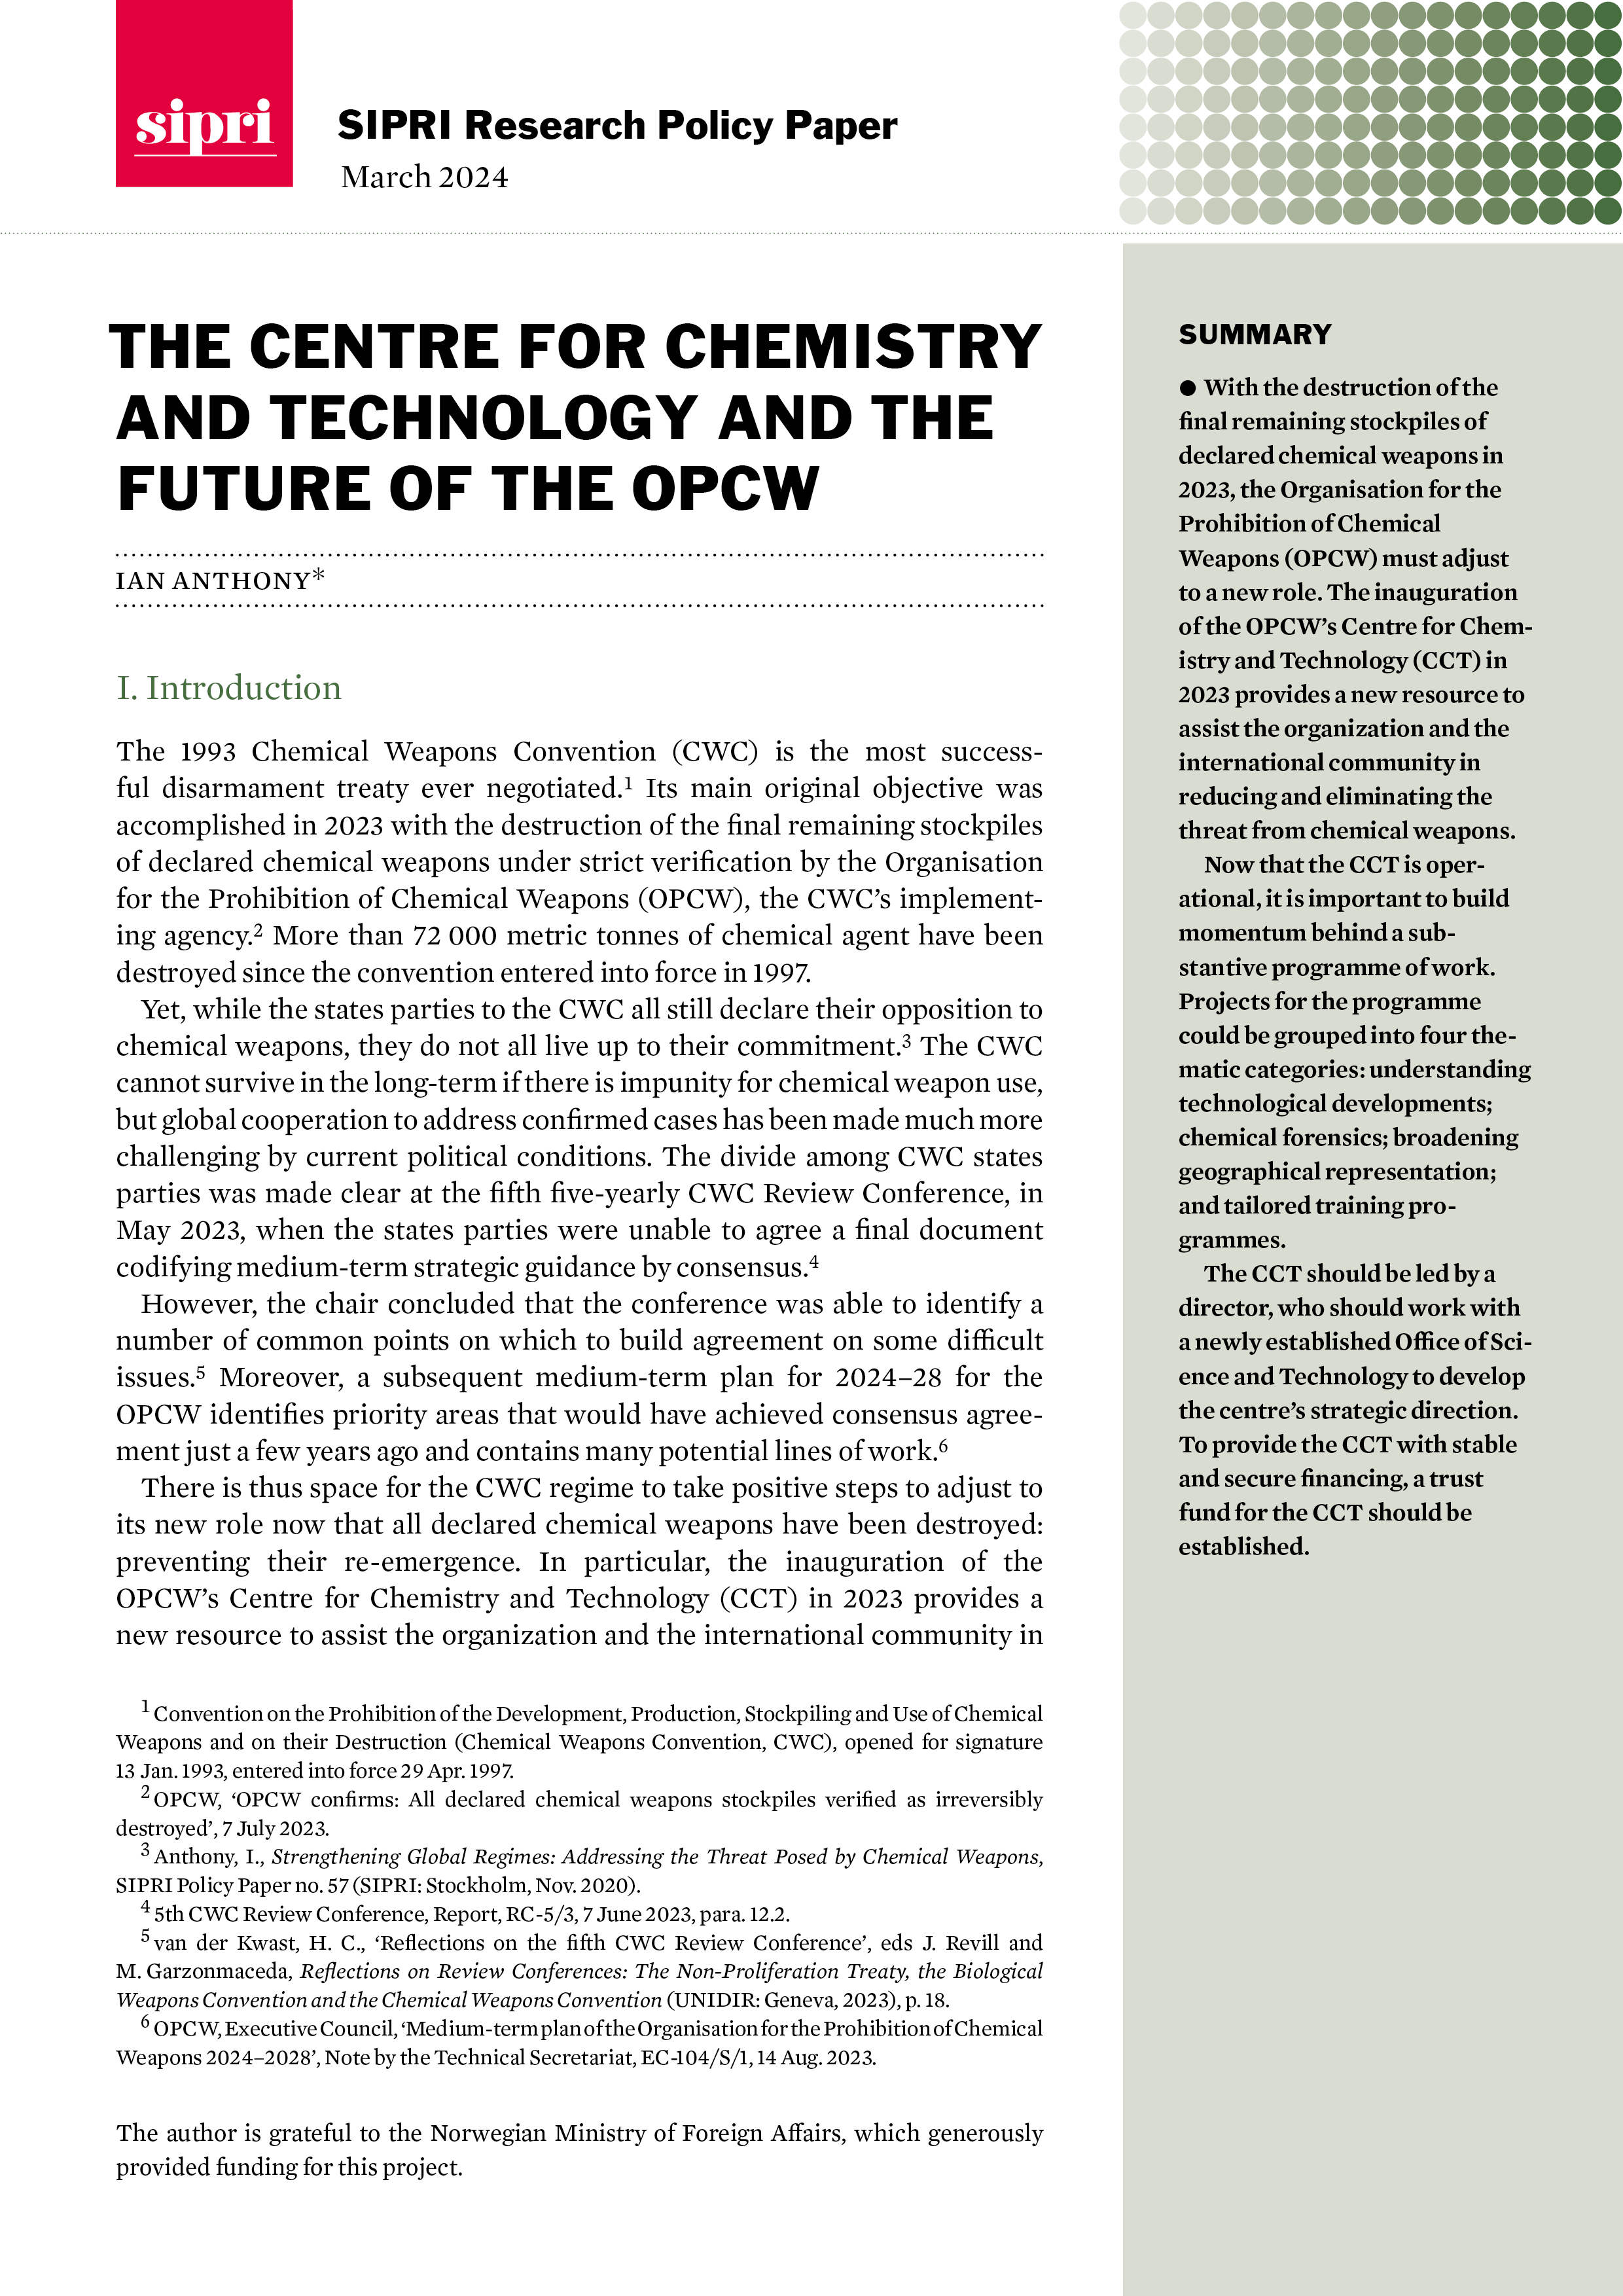 Proposed Revision: The Central Role of Chemistry and Technology in Shaping the Future of the OPCW